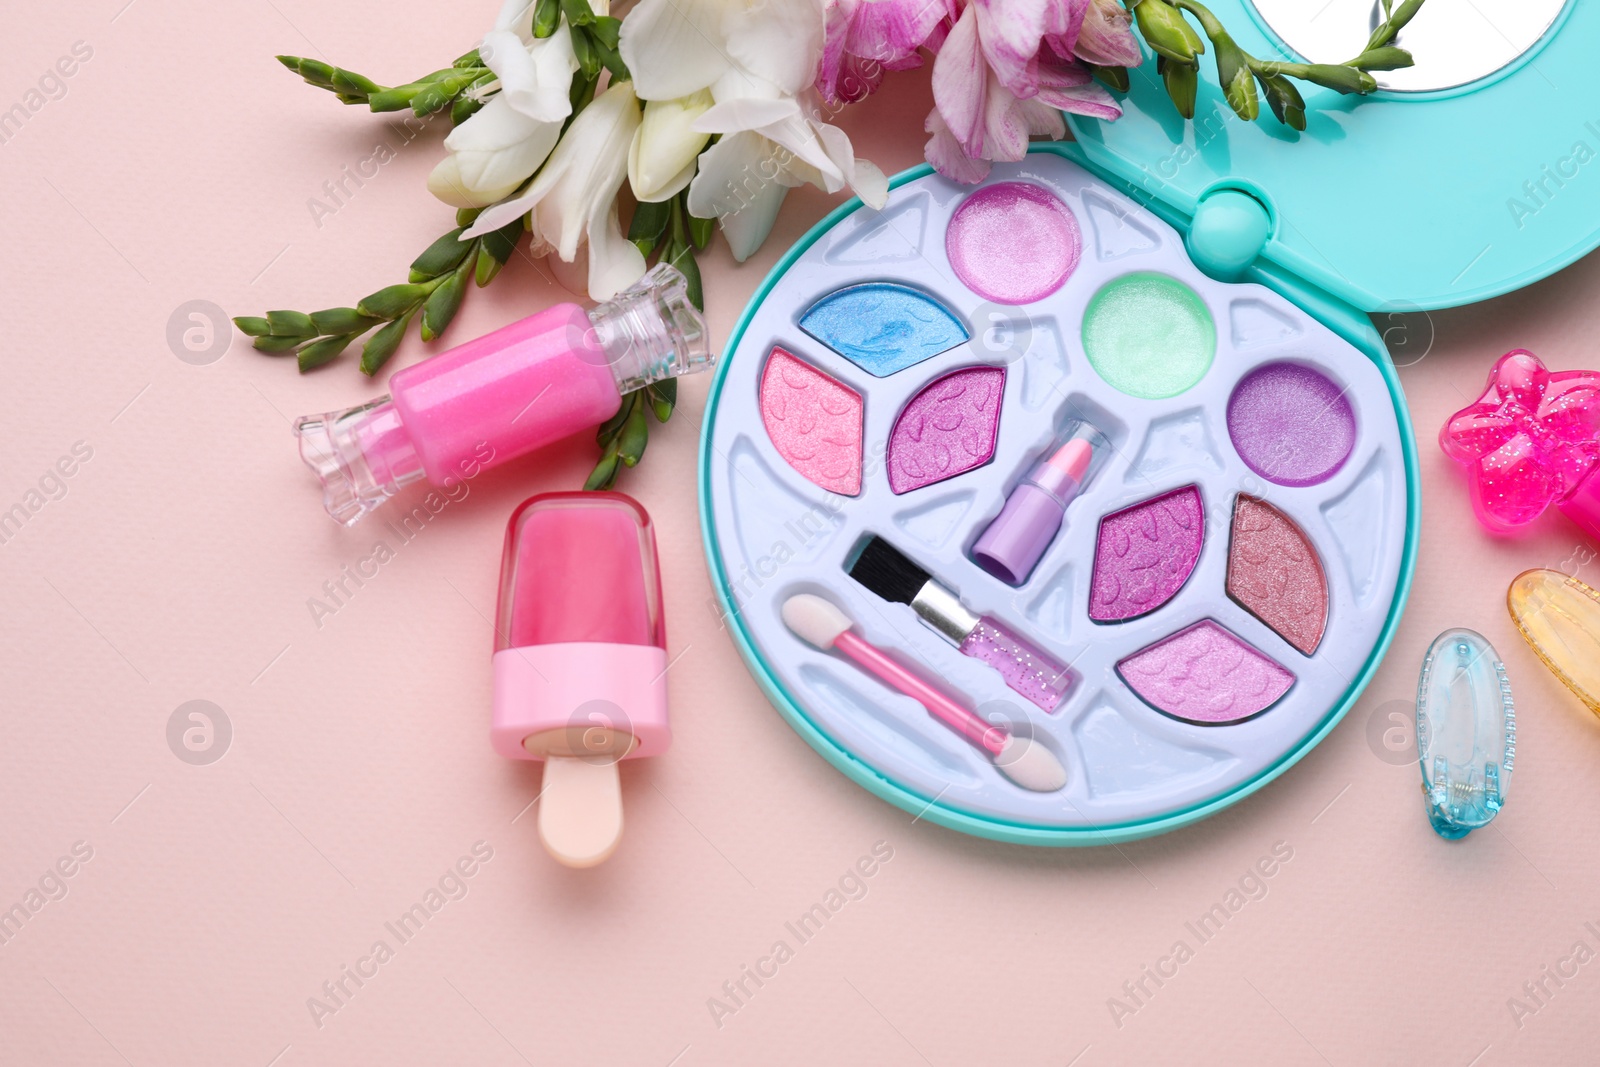 Photo of Decorative cosmetics for kids. Eye shadow palette, lipsticks, accessories and flowers on pink background, flat lay